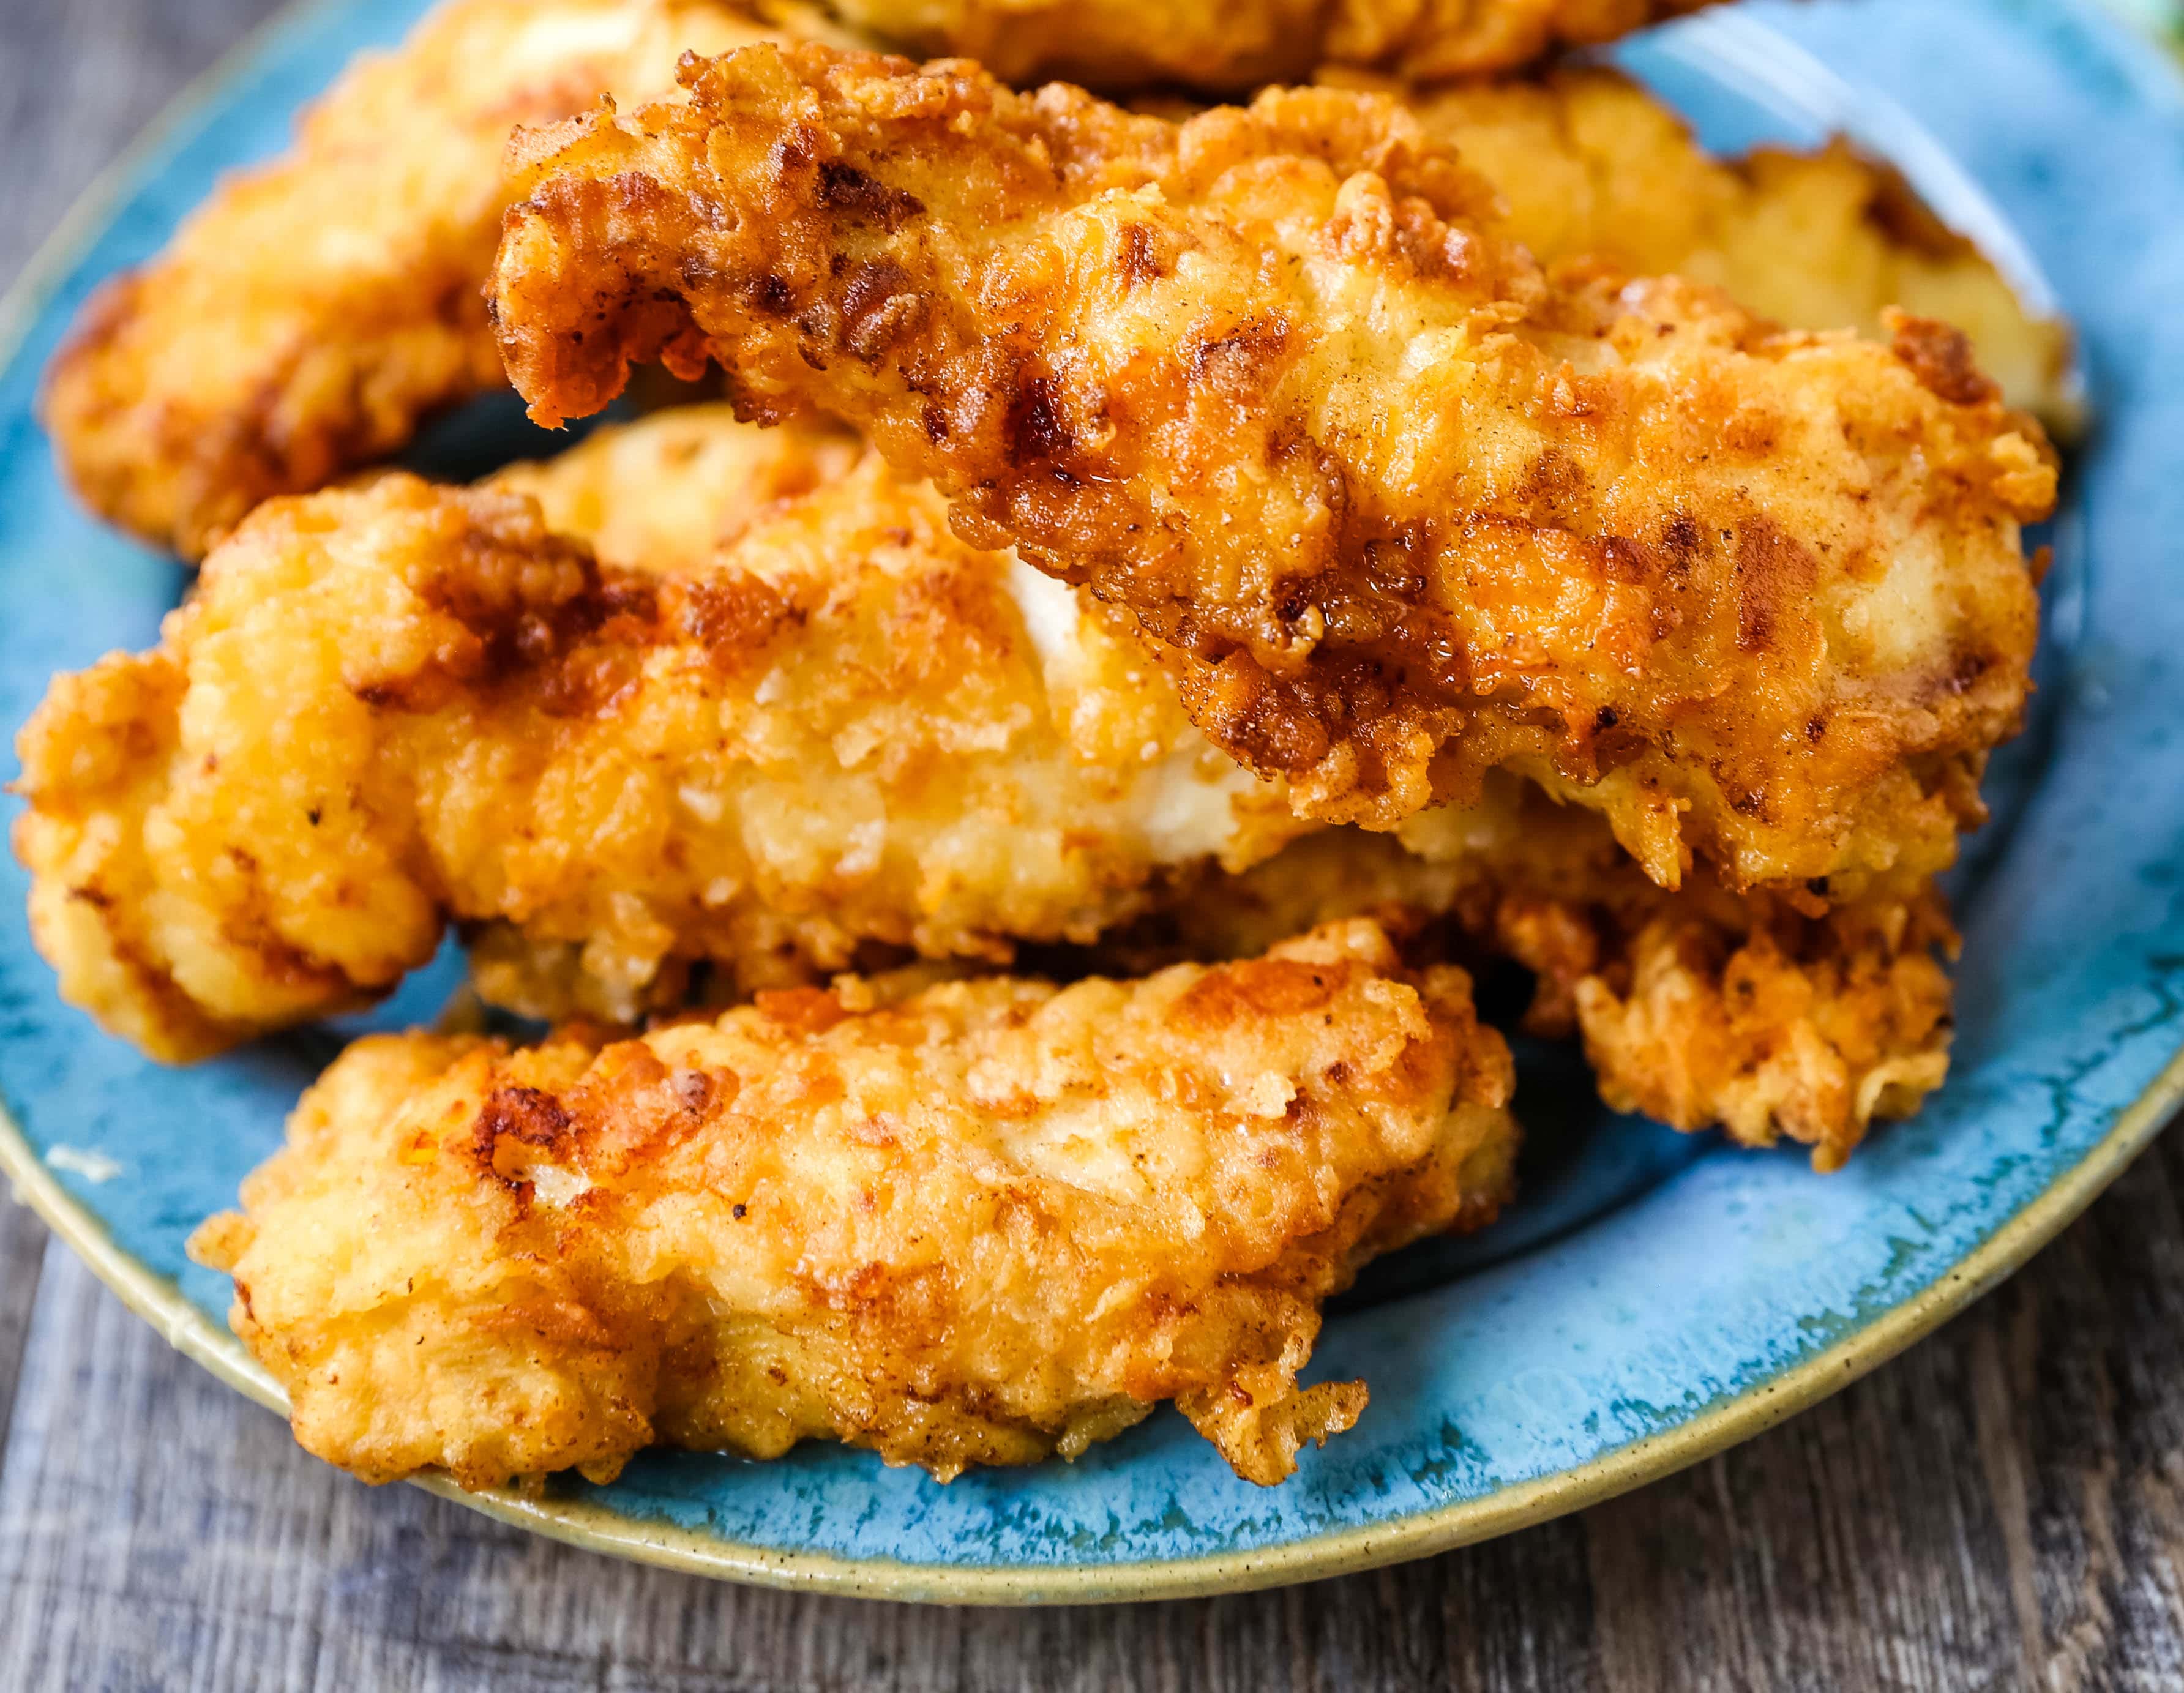 Fried Chicken Tenders Juicy, tender, marinated chicken dipped in coating and fried until perfectly crispy. The best fried chicken tenders recipe! www.modernhoney.com #chicken #chickentenders #friedchicken #friedchickentenders